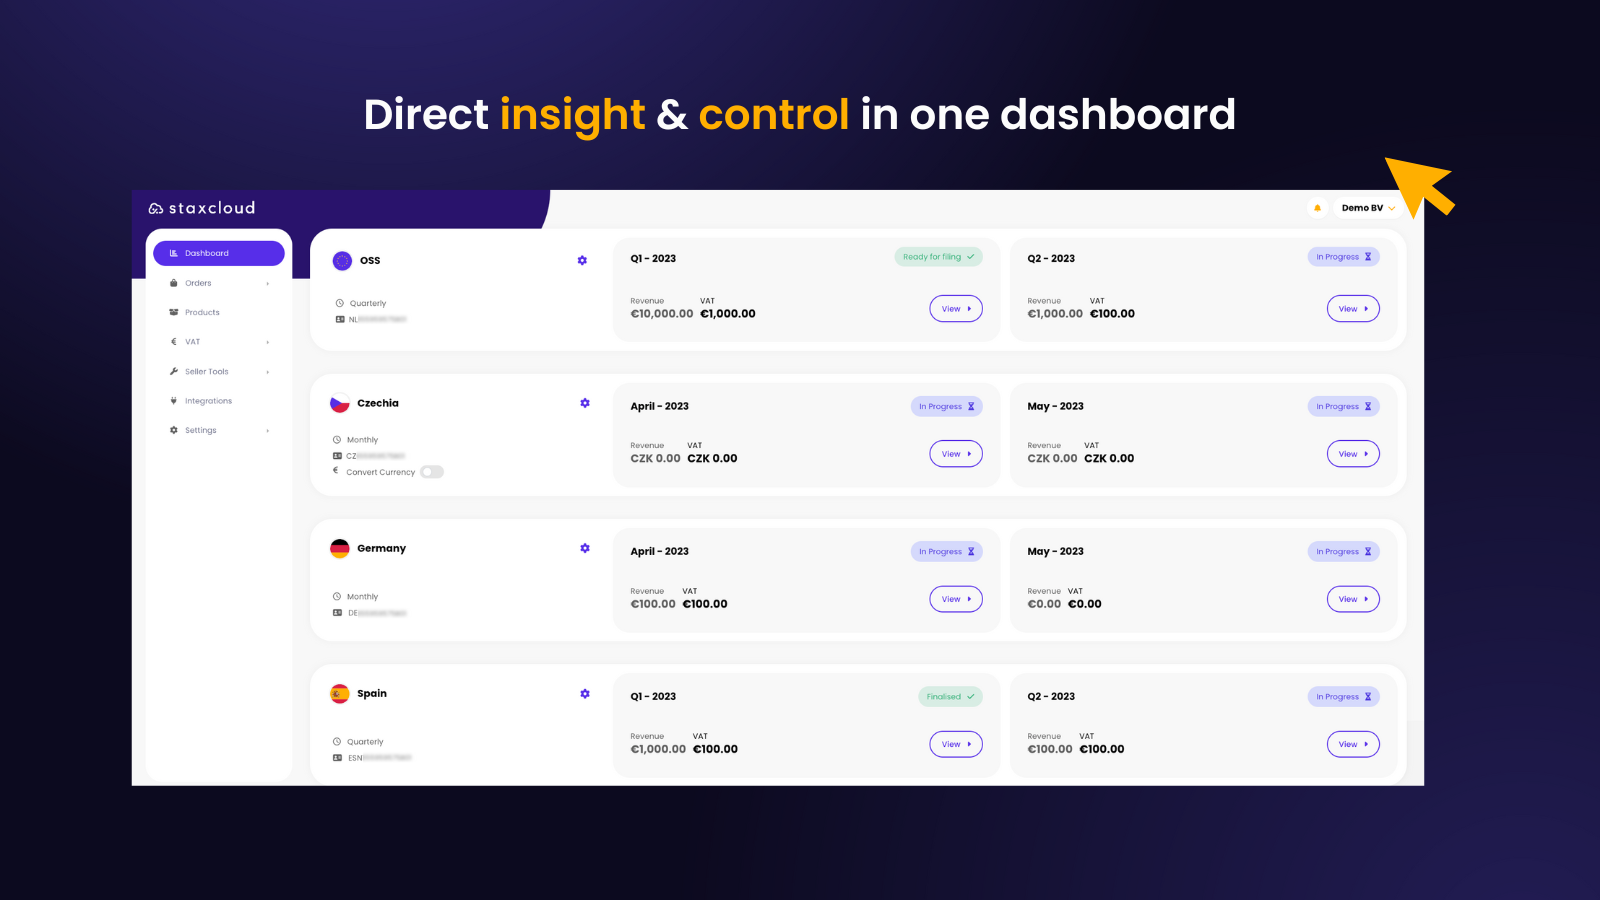 Direct insight & control in one dashboard